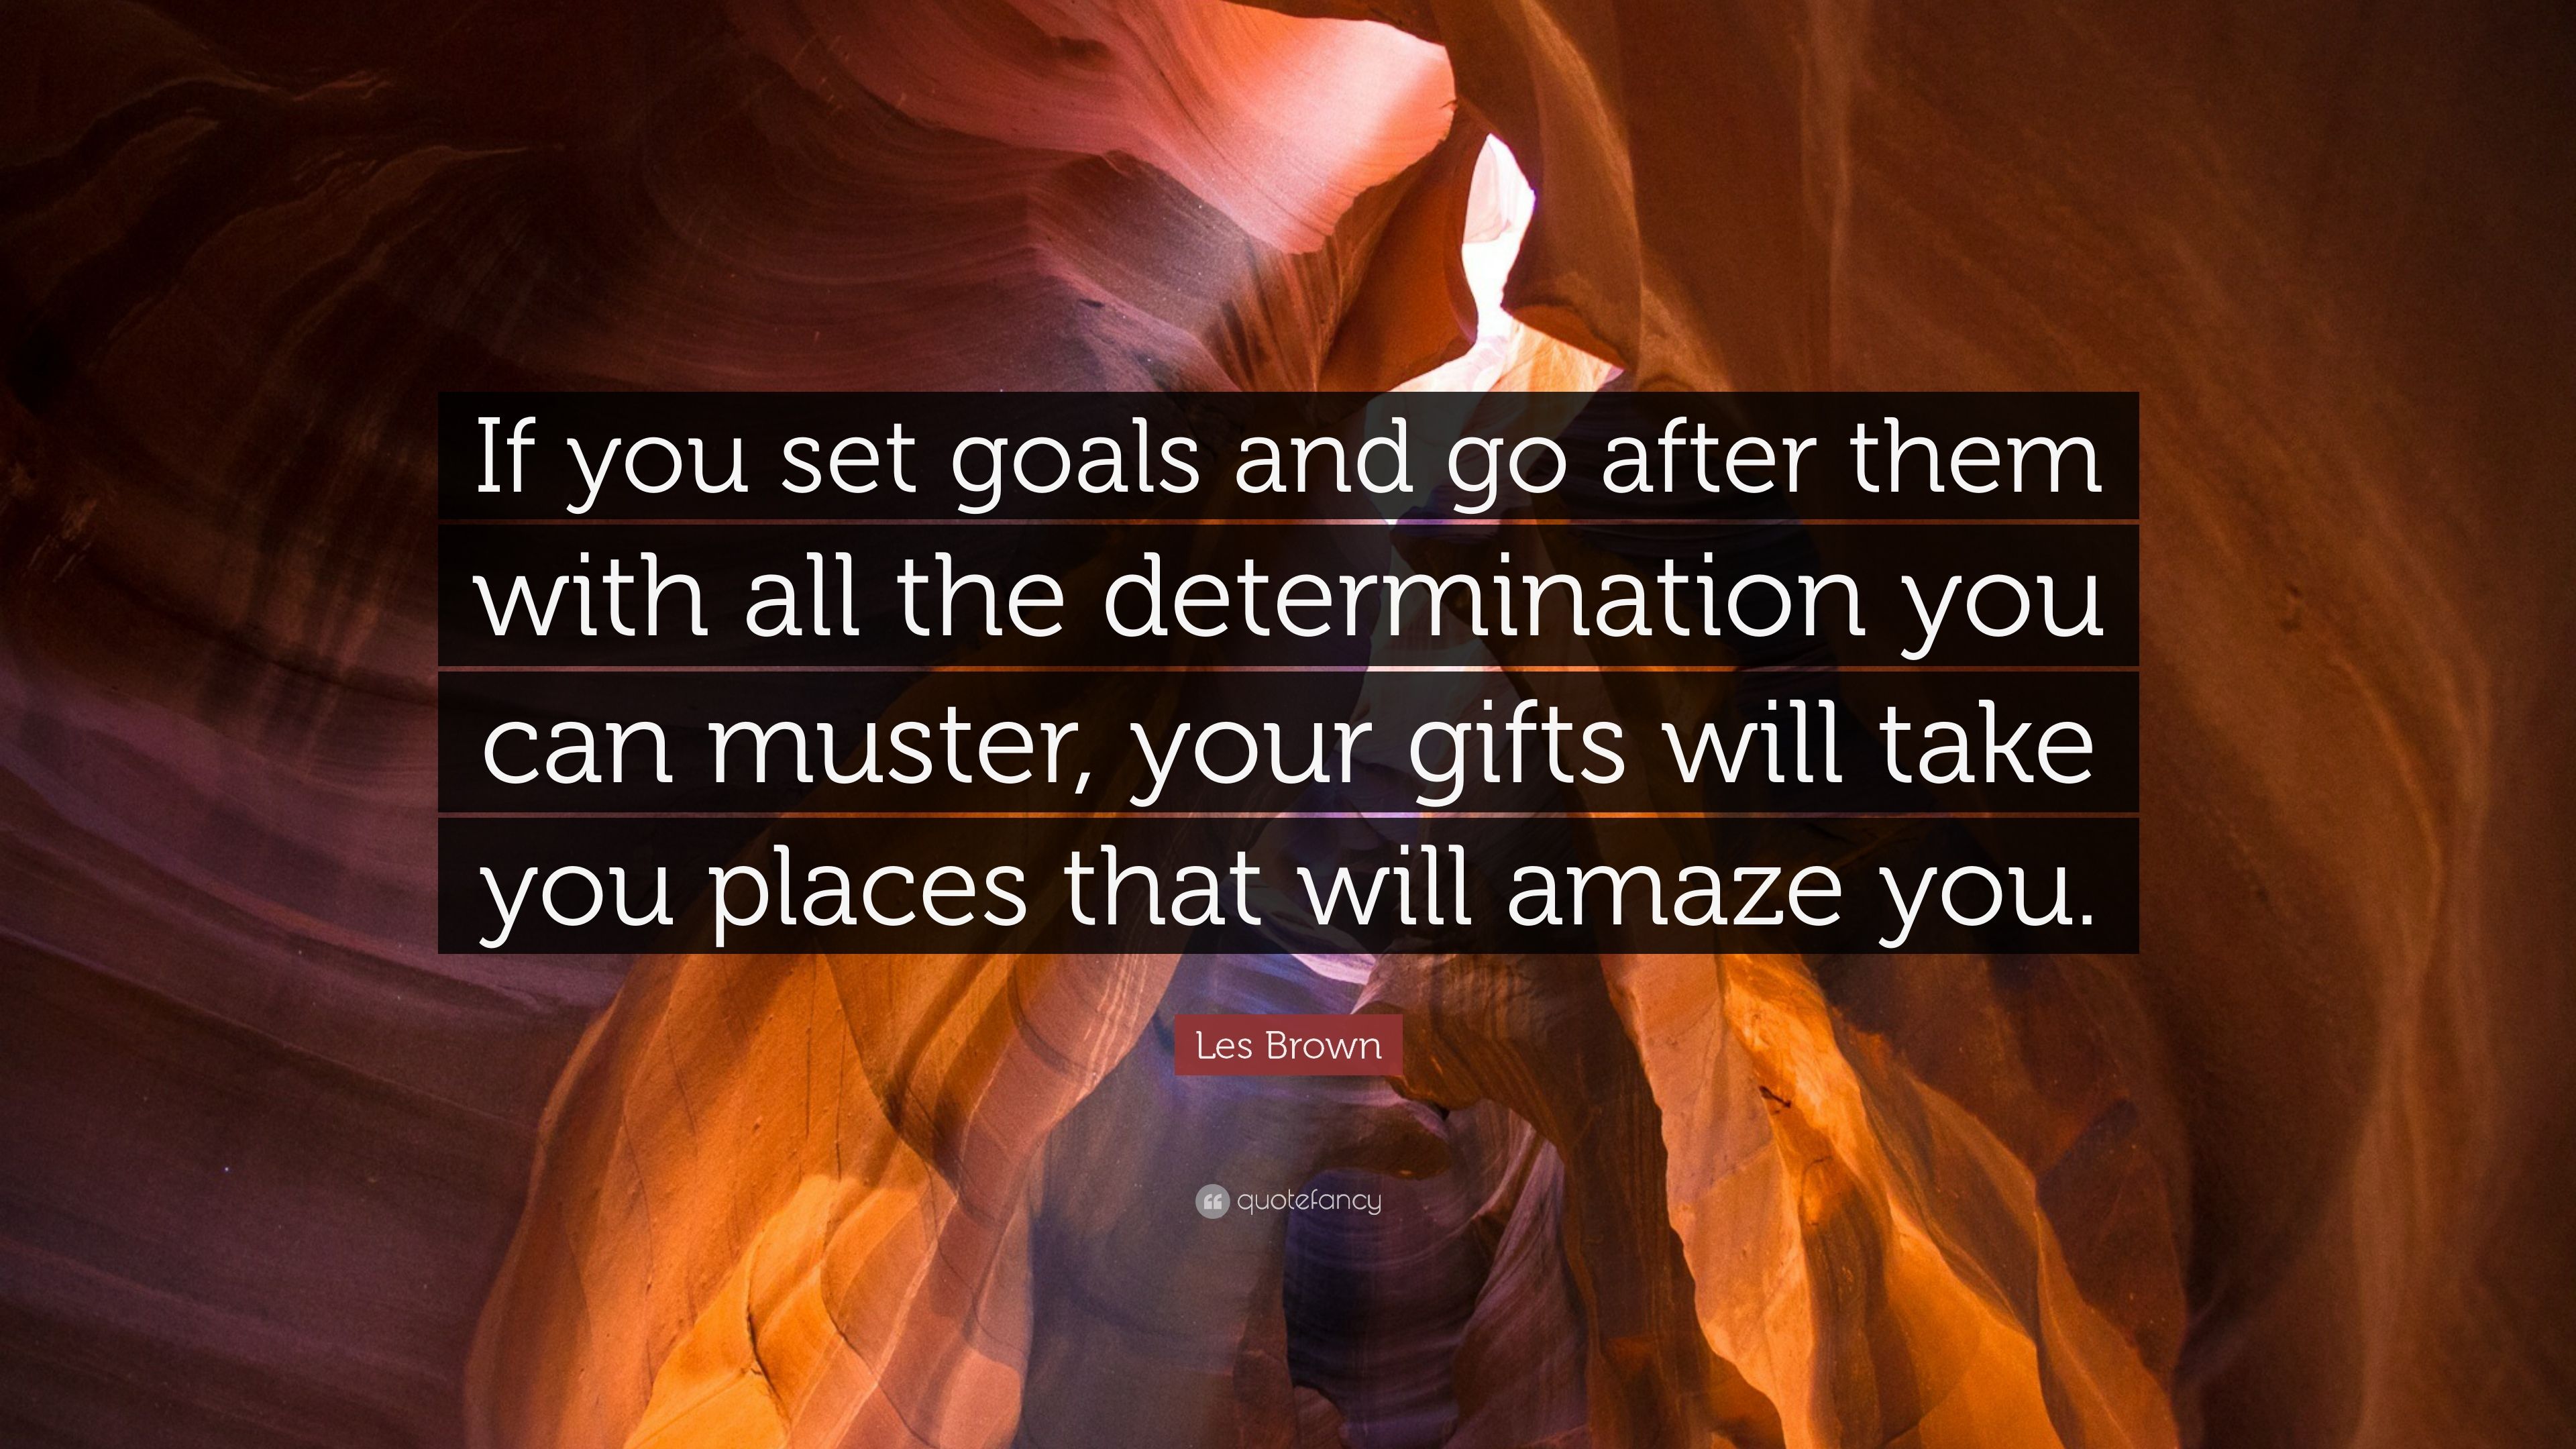 Les Brown Quote: “If you set goals and go after them with all the determination you can muster, your gifts will take you places that will .” (23 wallpaper)